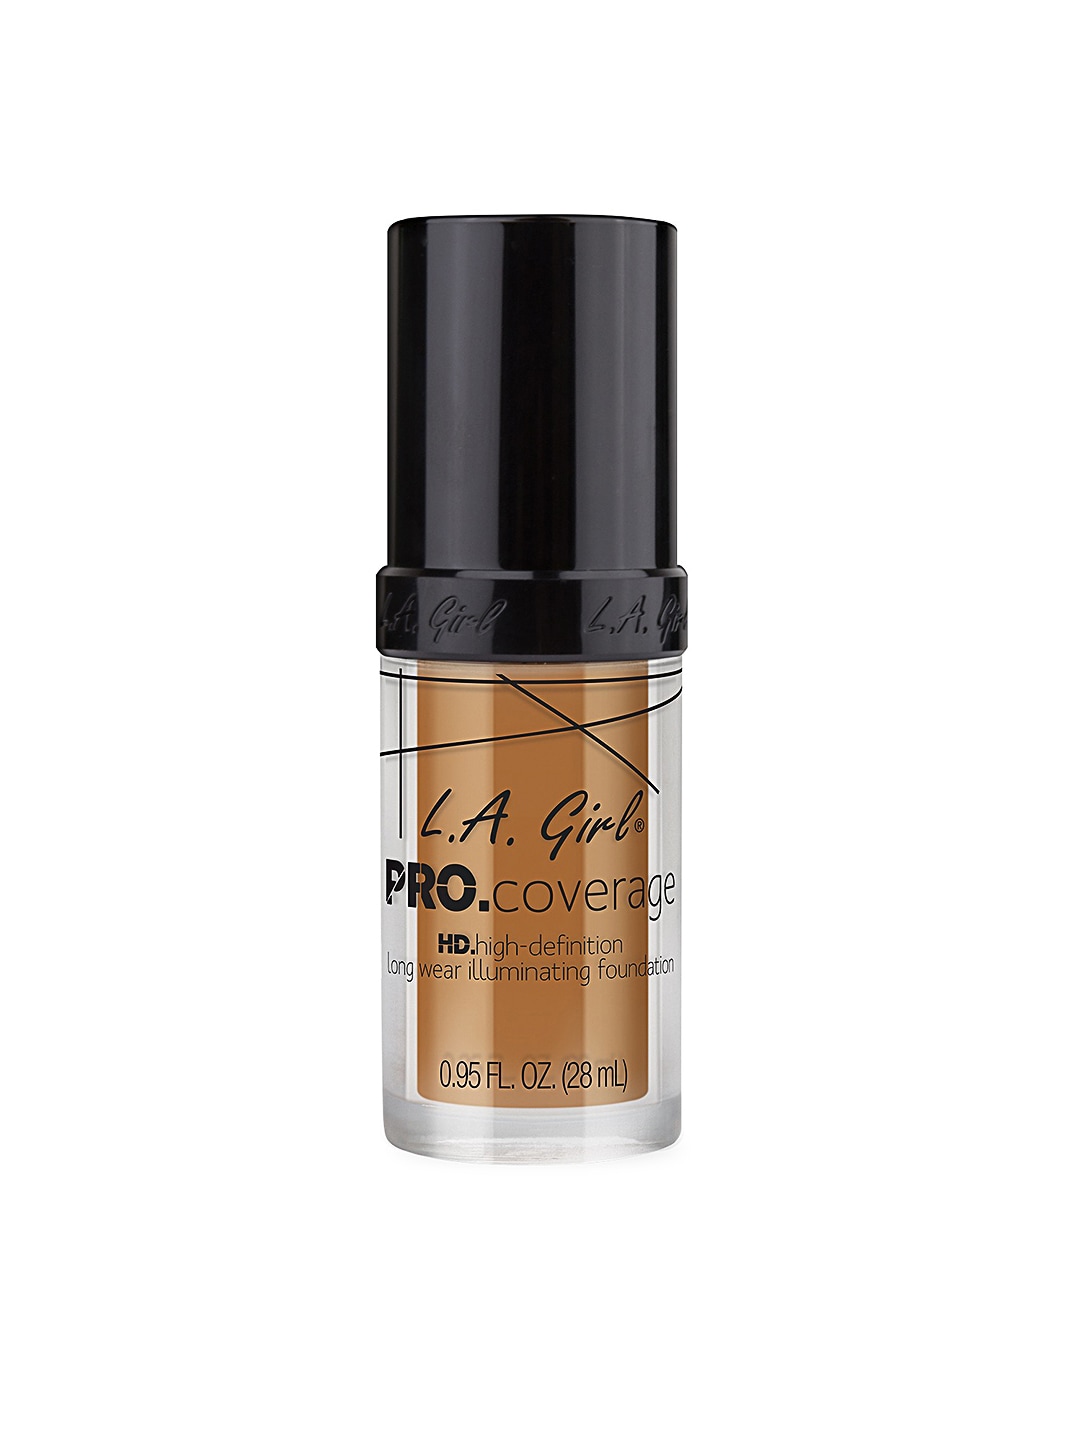 L.A Girl Bronze Pro Coverage HD Long Wear Illuminating Foundation GLM651 Price in India